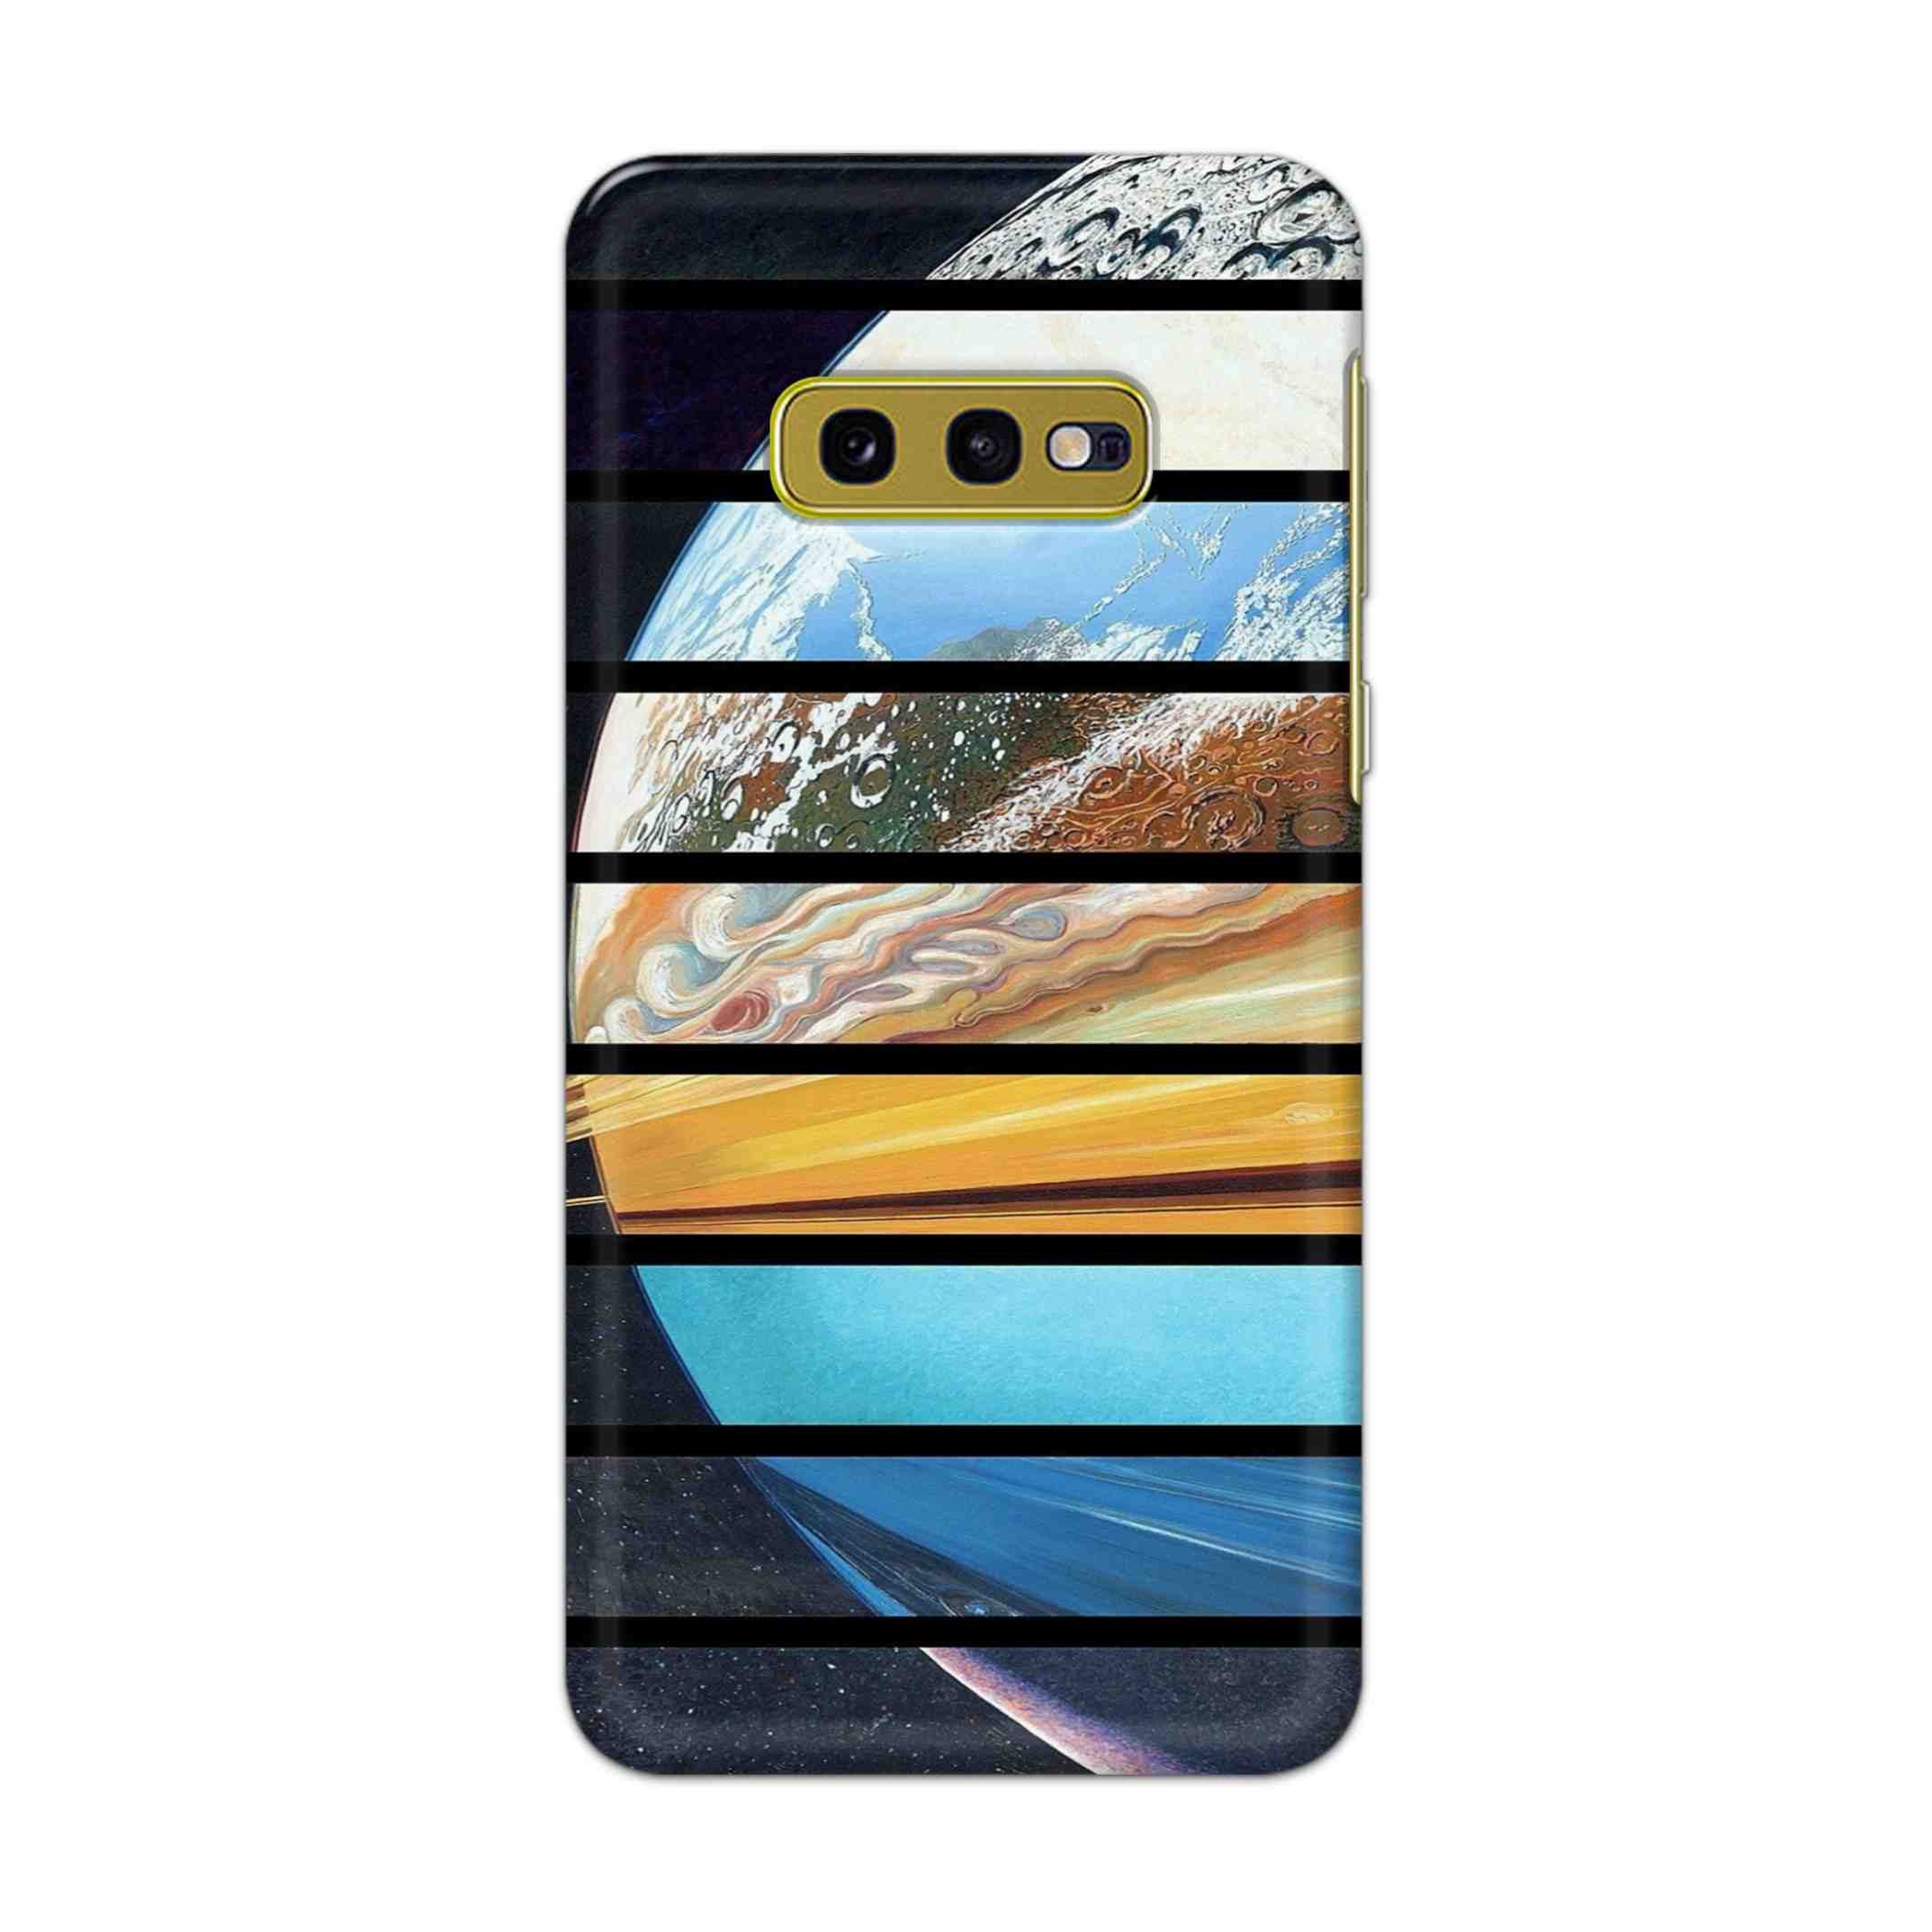 Buy Colourful Earth Hard Back Mobile Phone Case Cover For Samsung Galaxy S10e Online